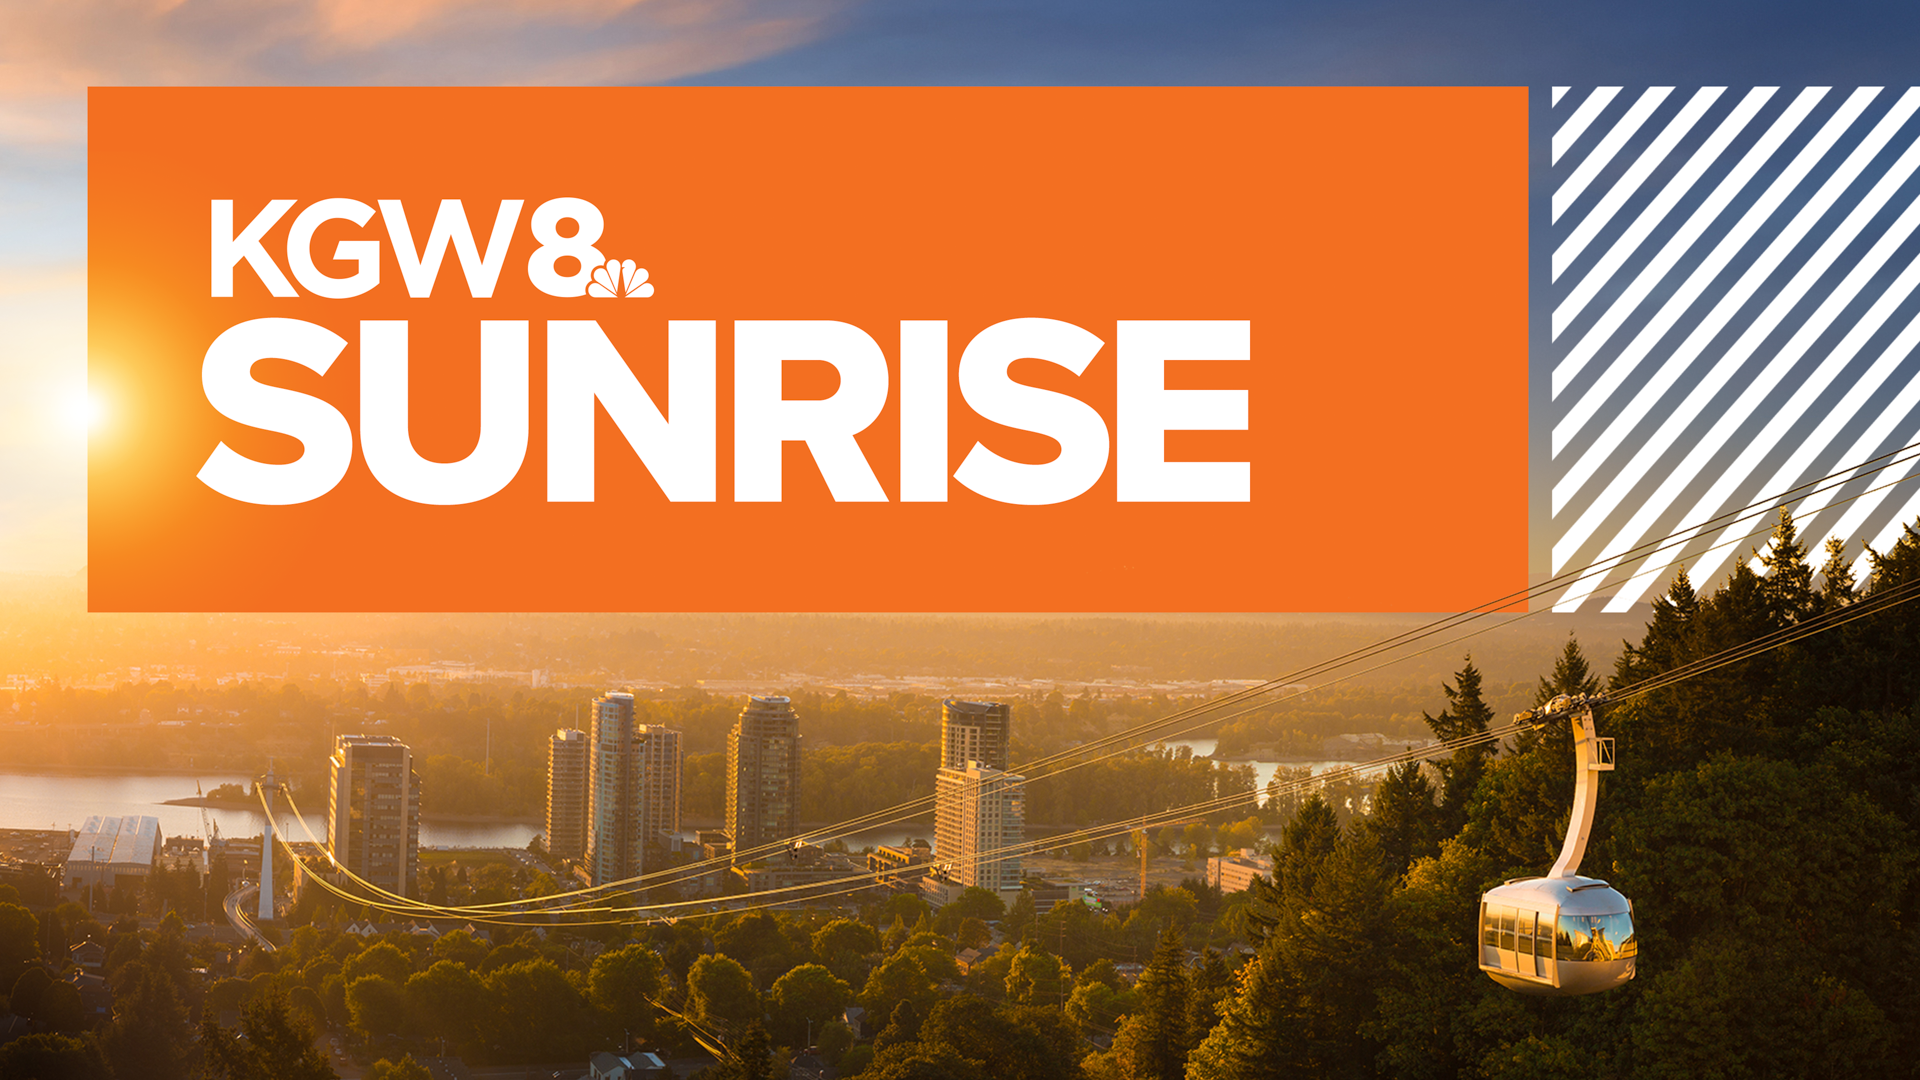 KGW Top Stories: Sunrise, Tuesday, January 24, 2023